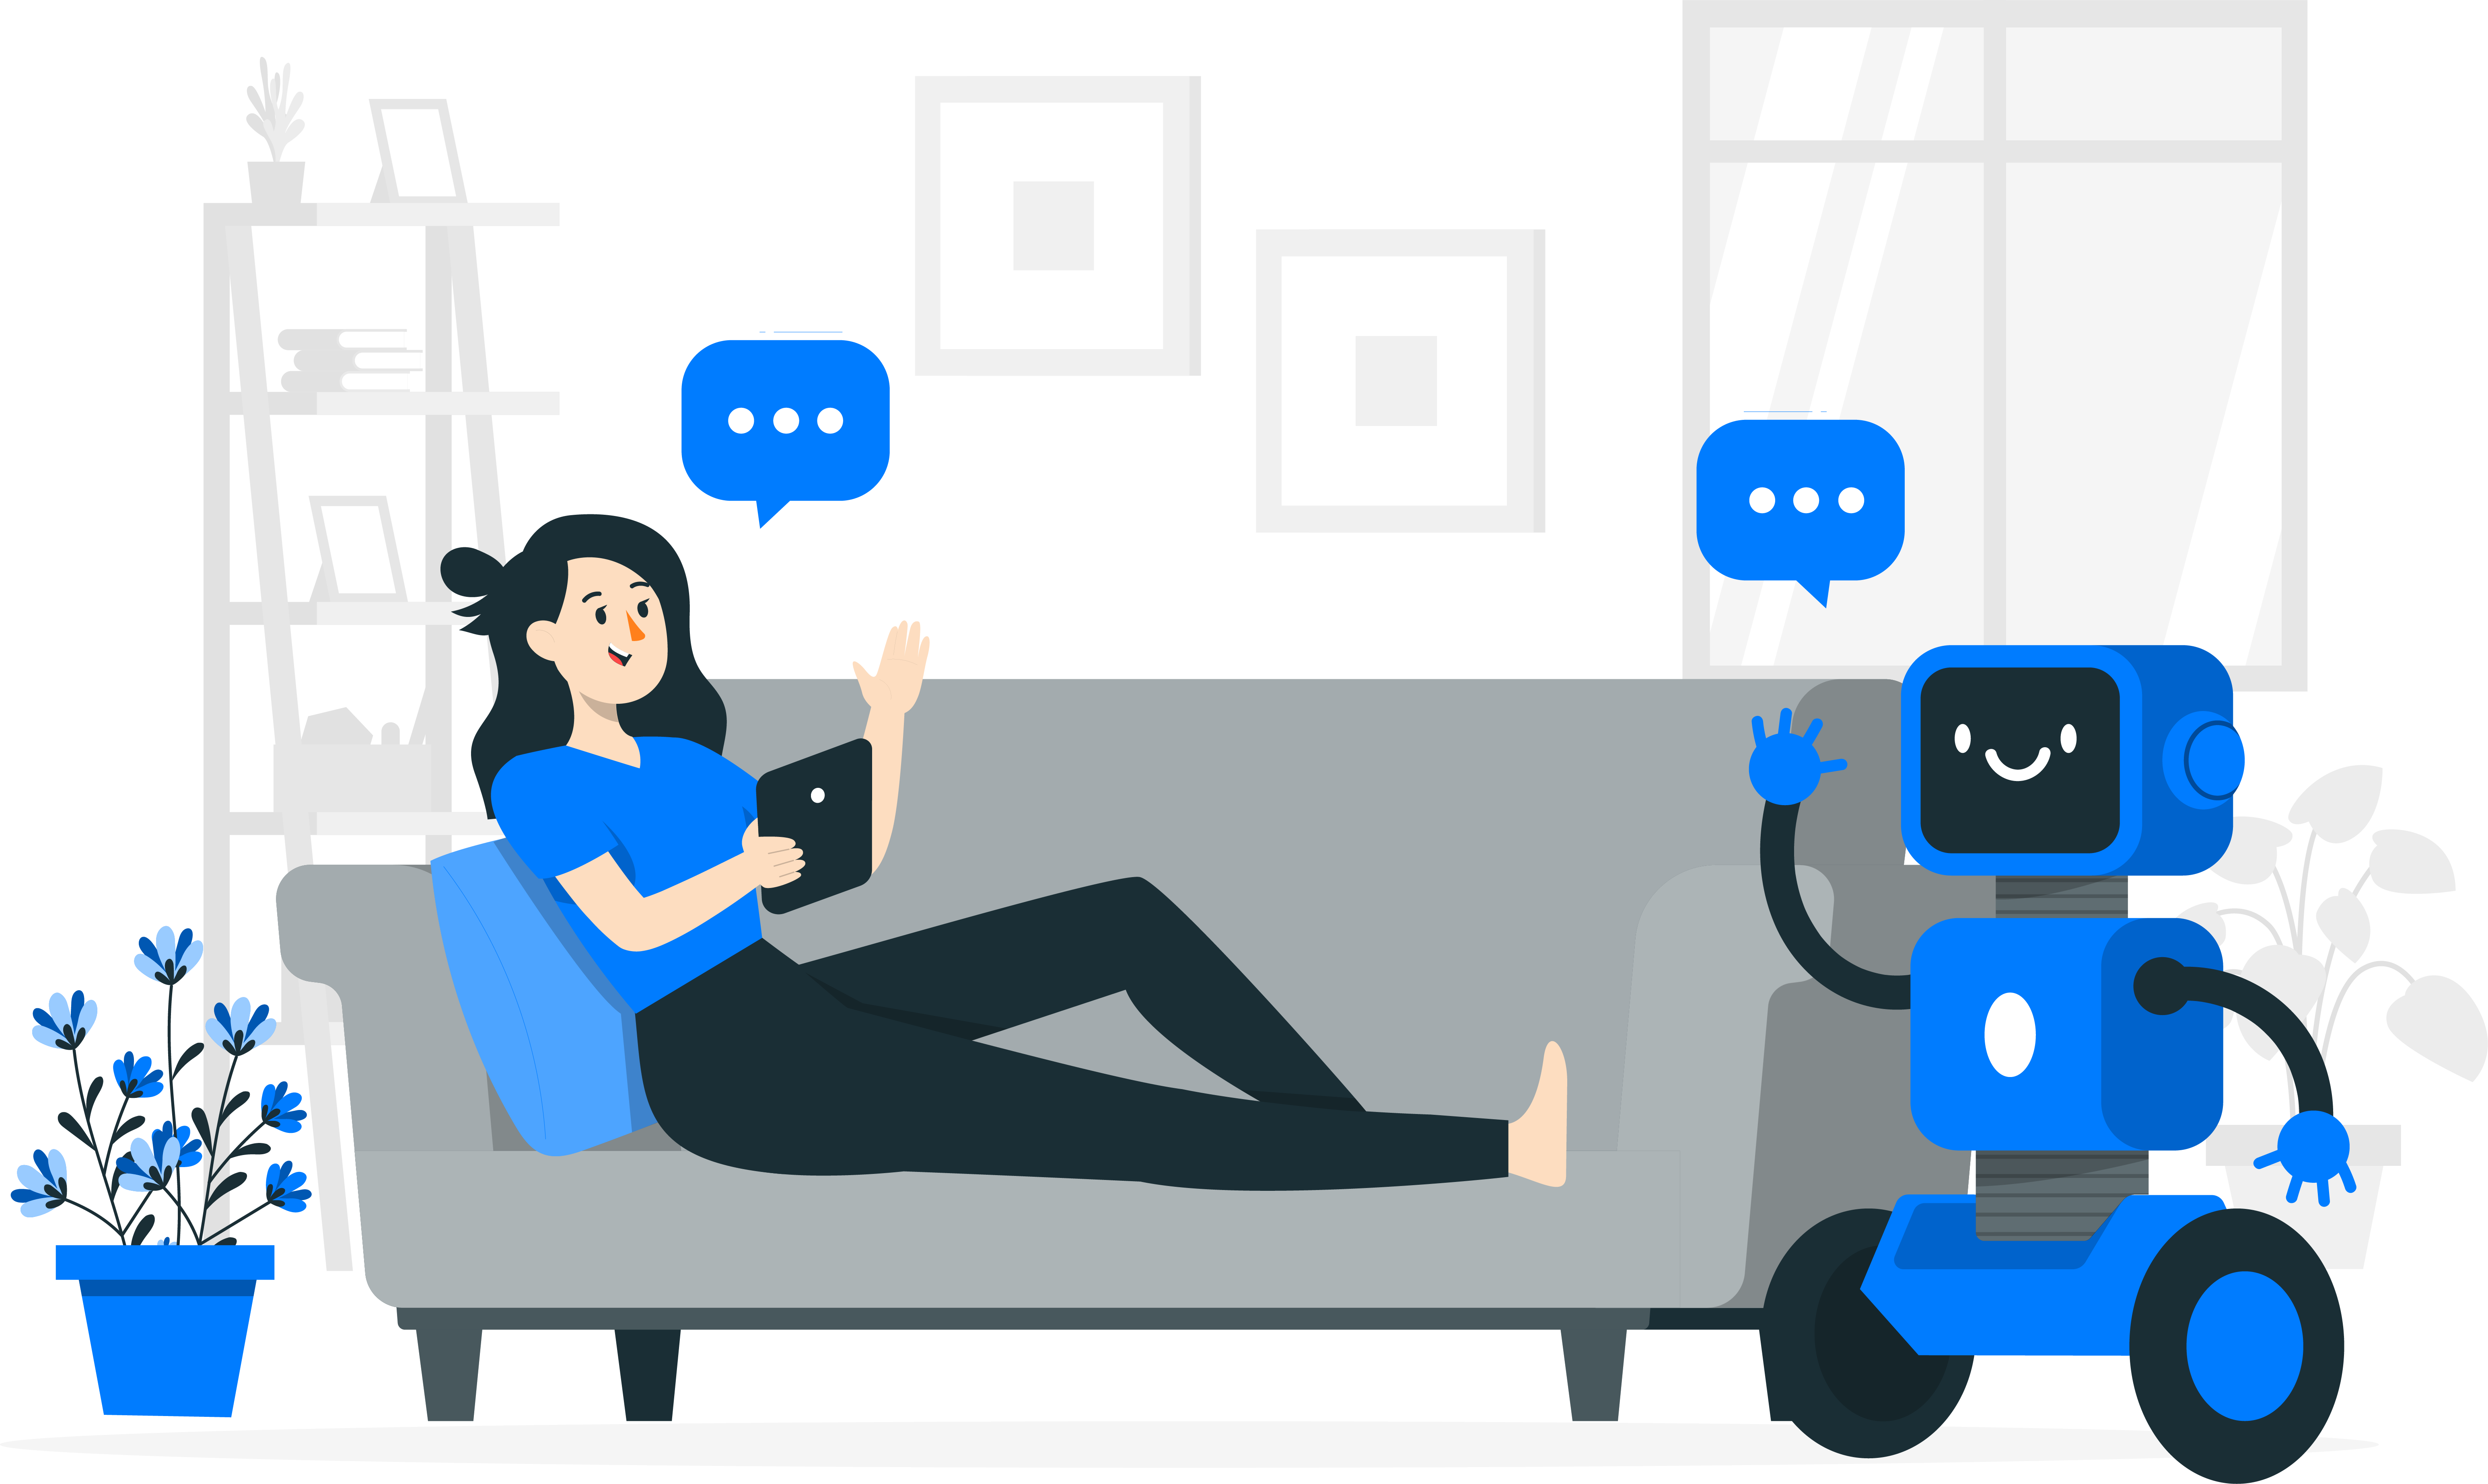 Customers can switch from chatbot to calling the support team carefree.